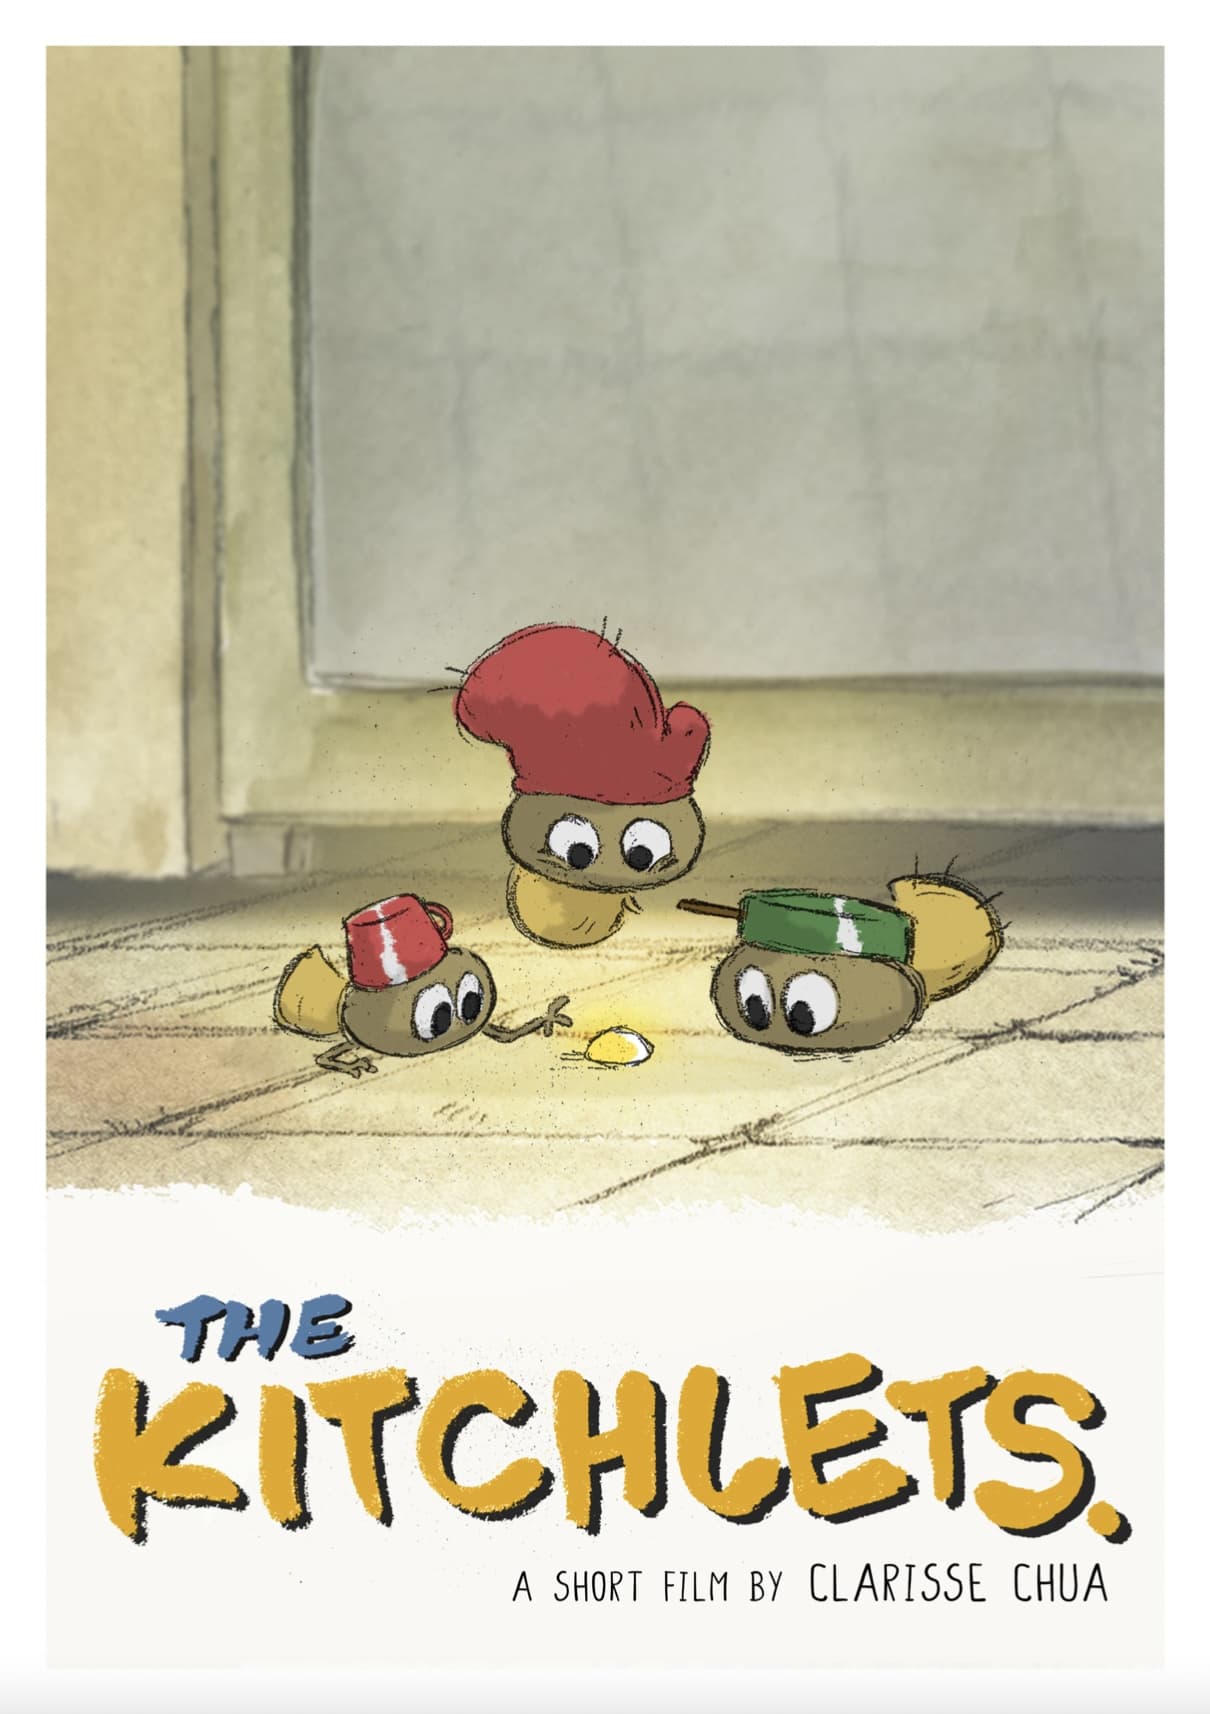 The Kitchlets